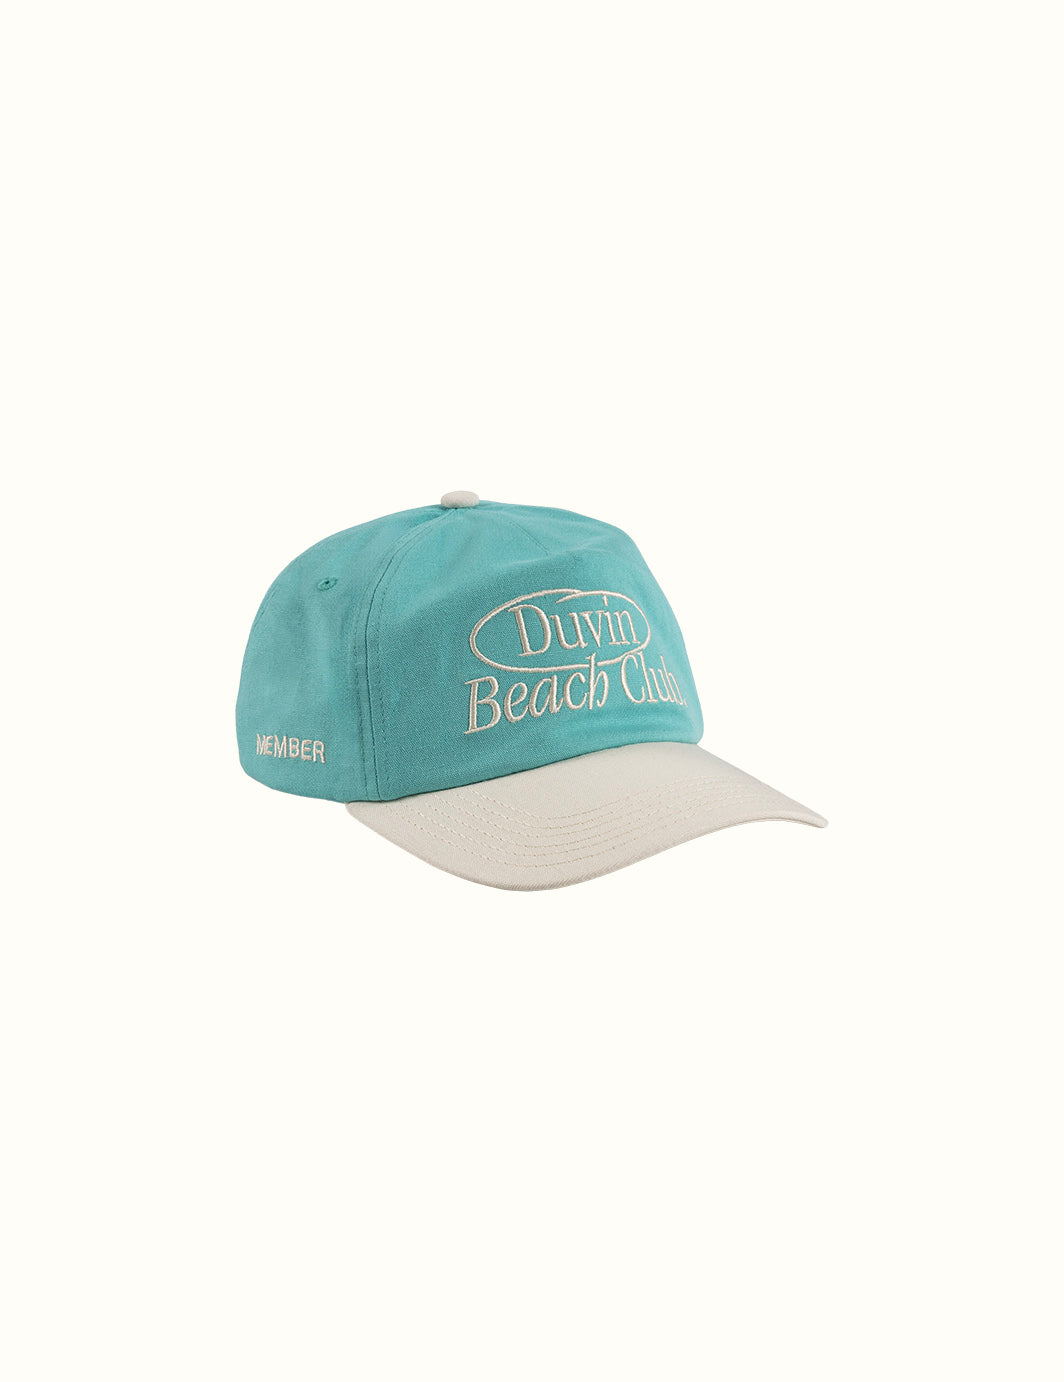 Members Only Teal Hat | Mens Outdoor Hat | Duvin Design Co.